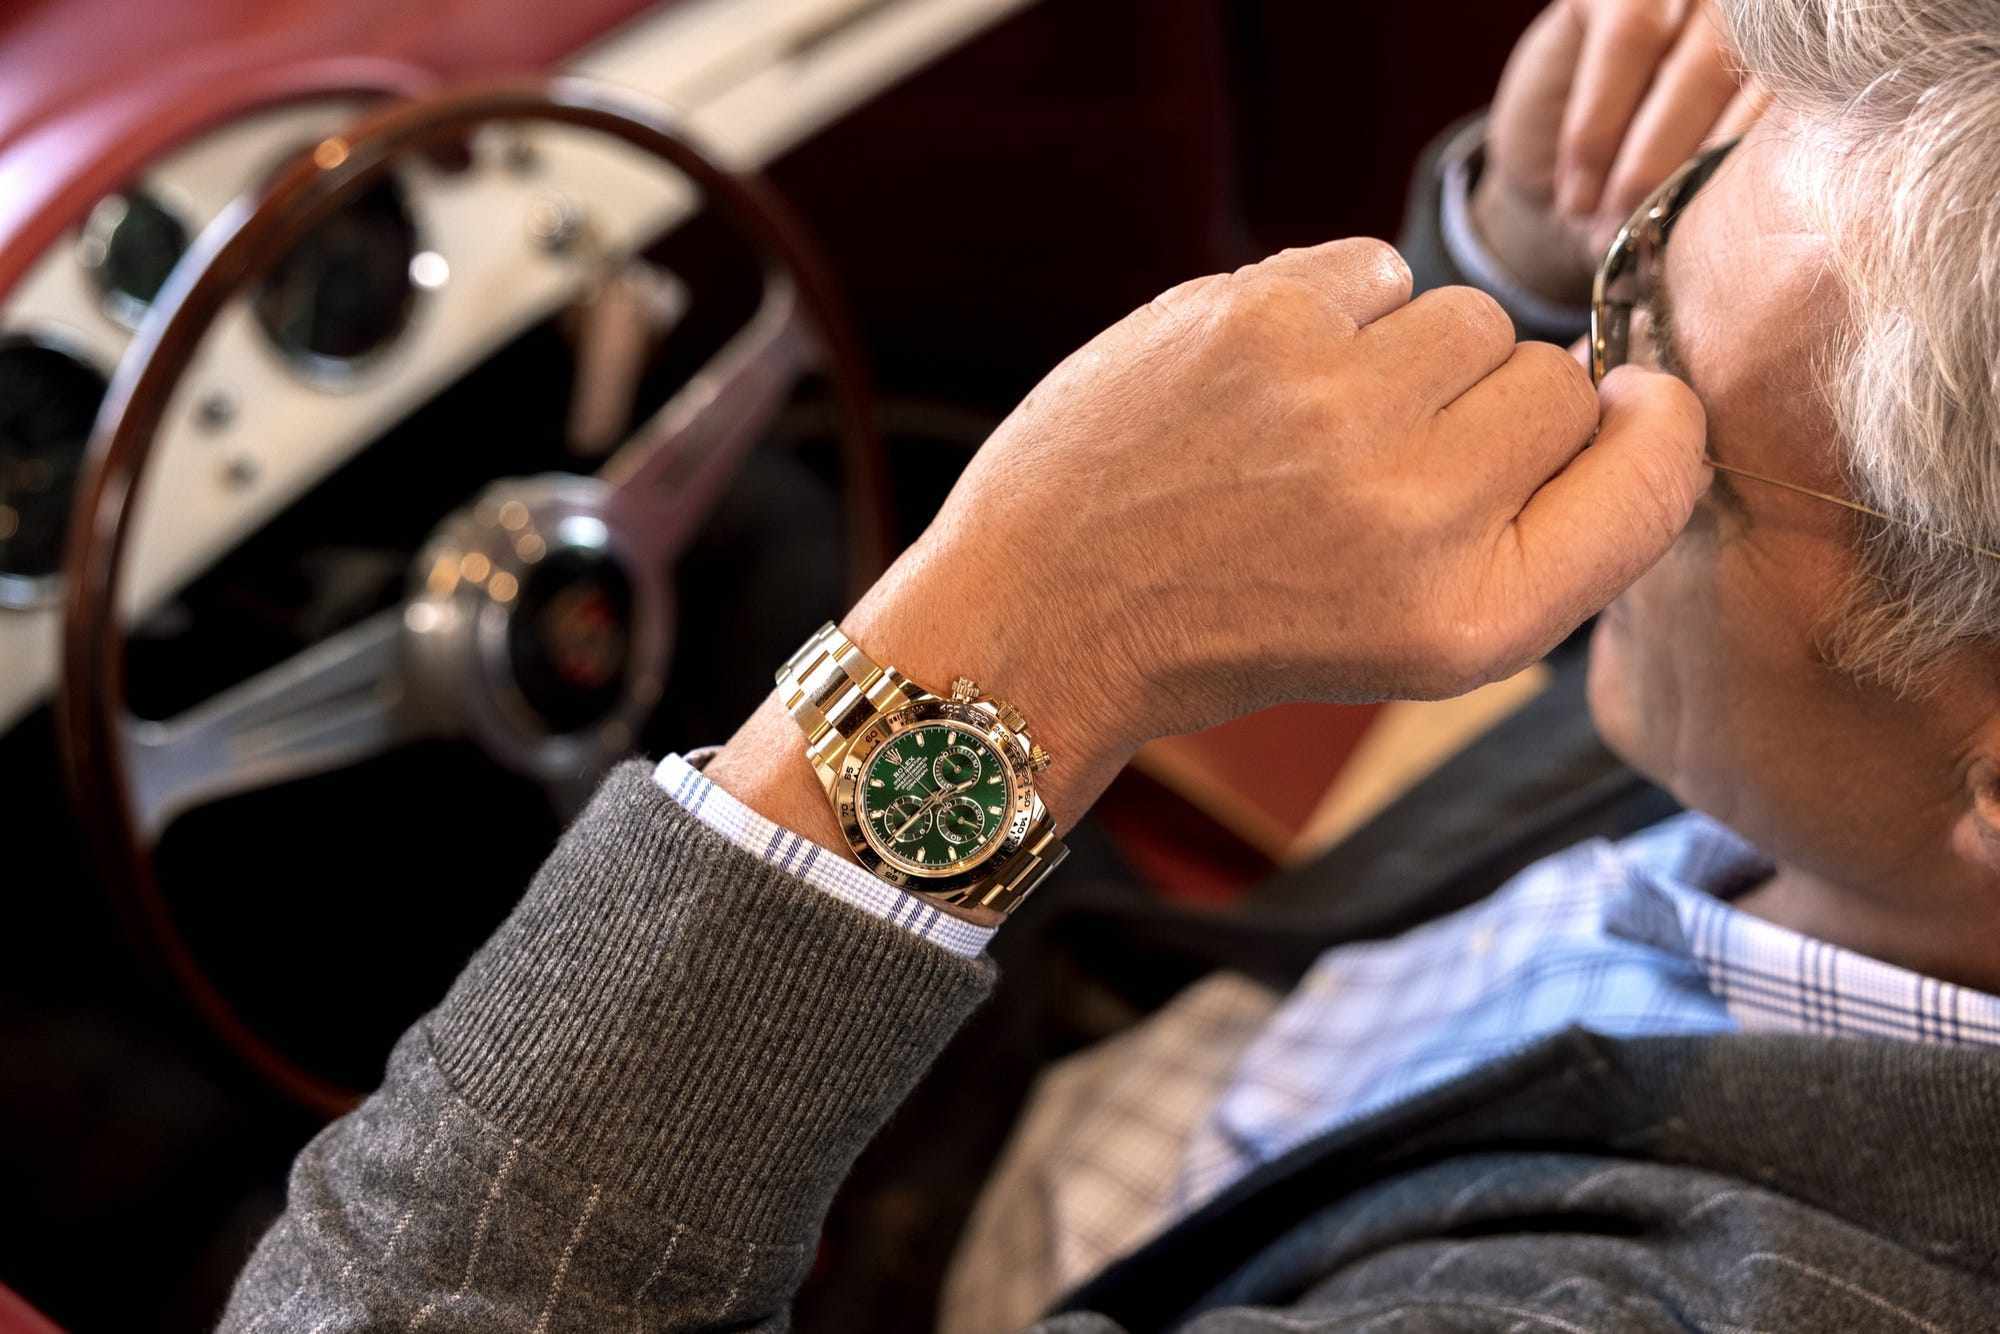 How investing in Rolex watches beats stocks, gold and real – models like the Cosmograph Daytona, Submariner, Date and Datejust have on the resale market | South China Morning